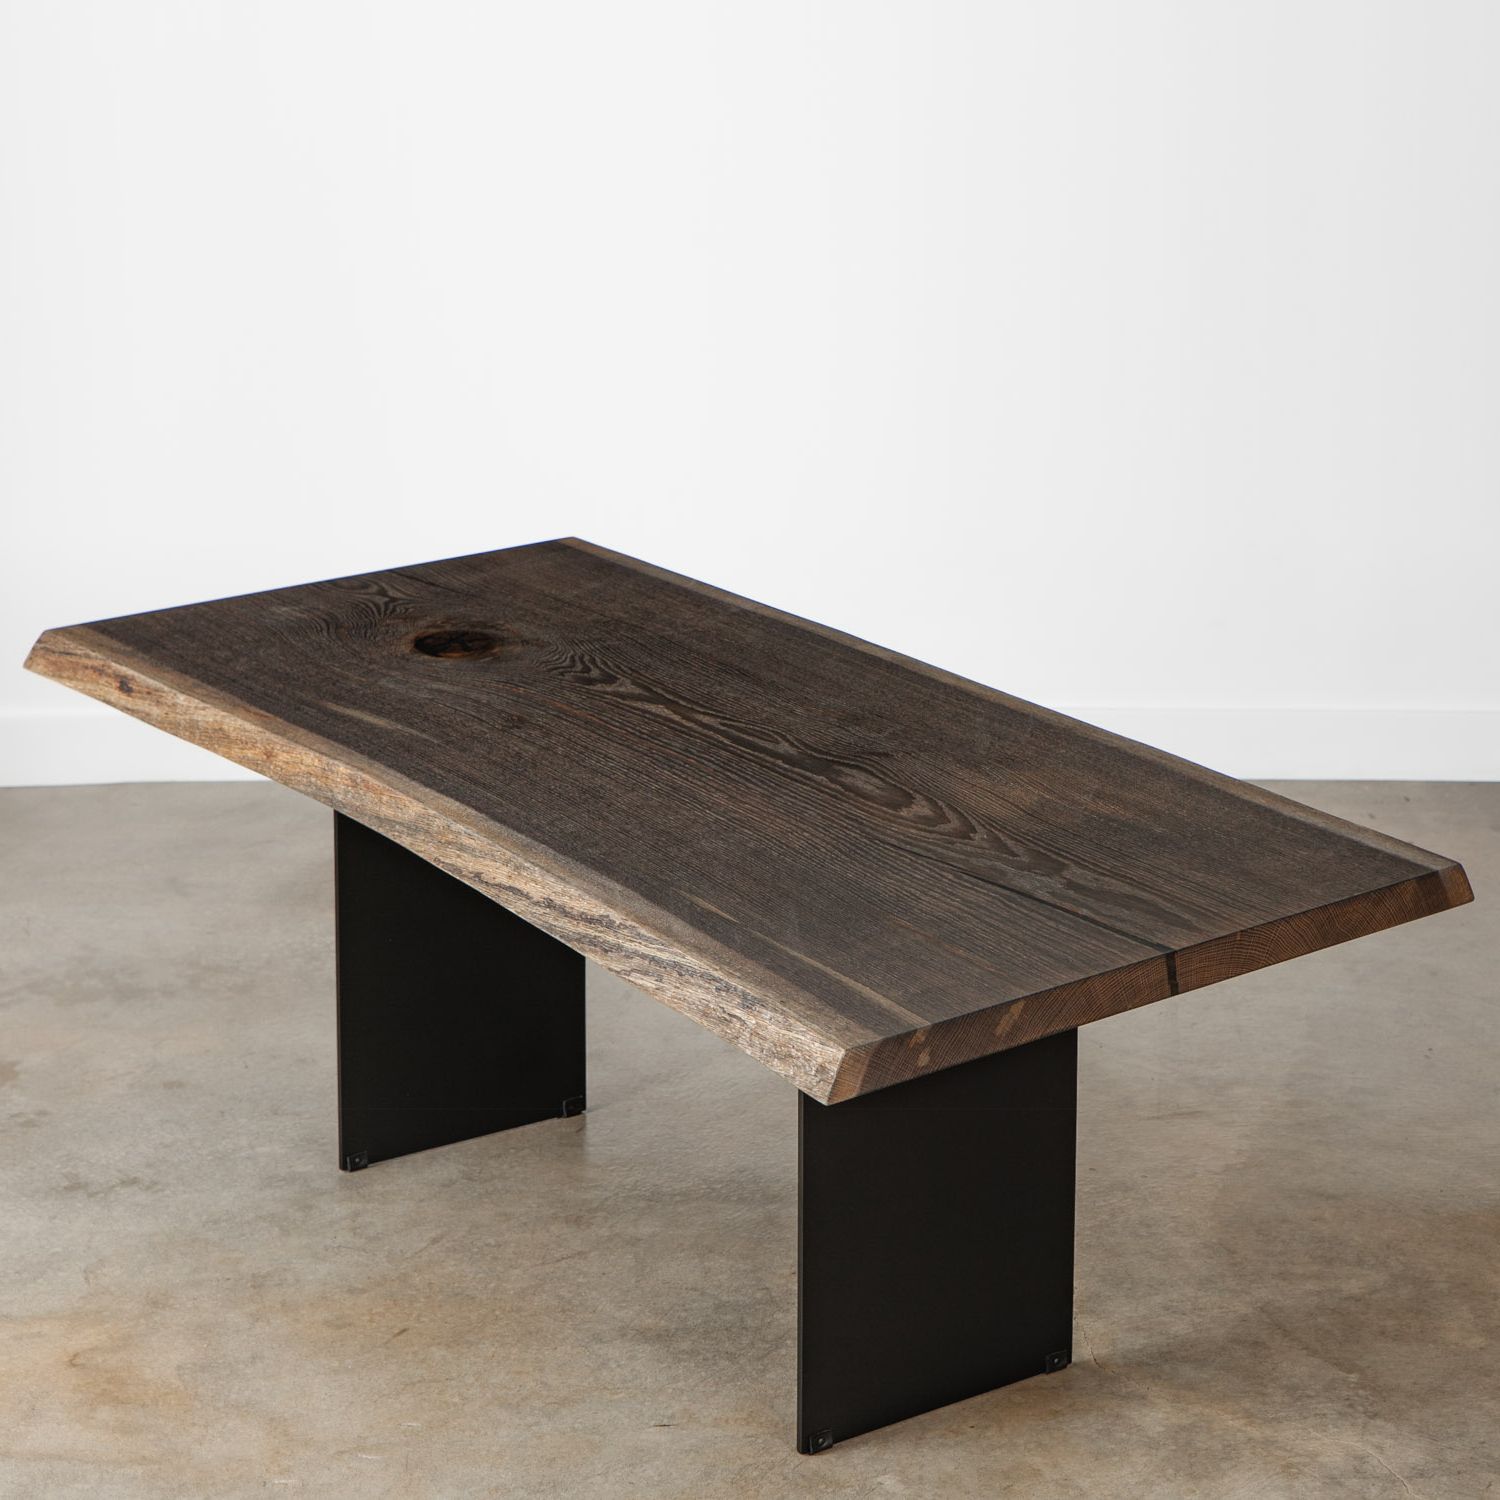 Oxidized Console Tables Intended For Most Recent Oxidized Oak Dining Table No (View 9 of 10)